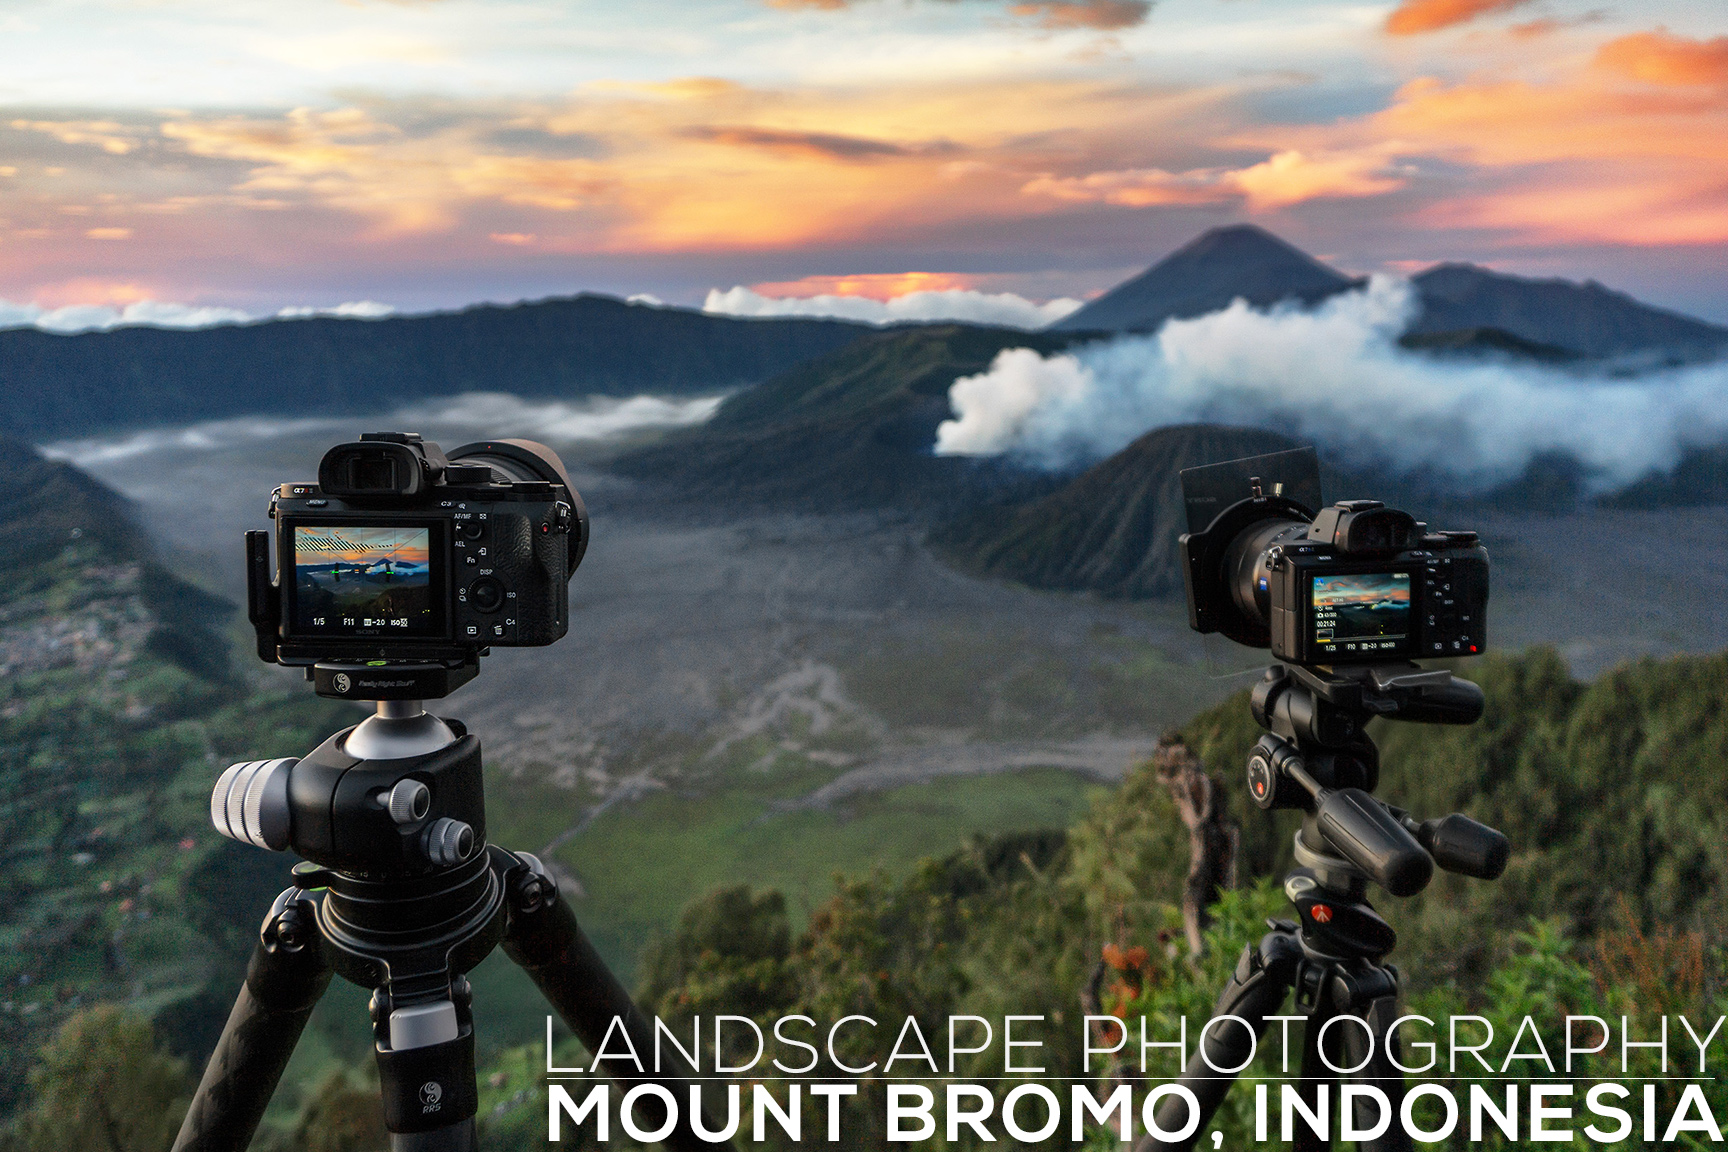 Video: Landscape Photography in Mount Bromo, Indonesia